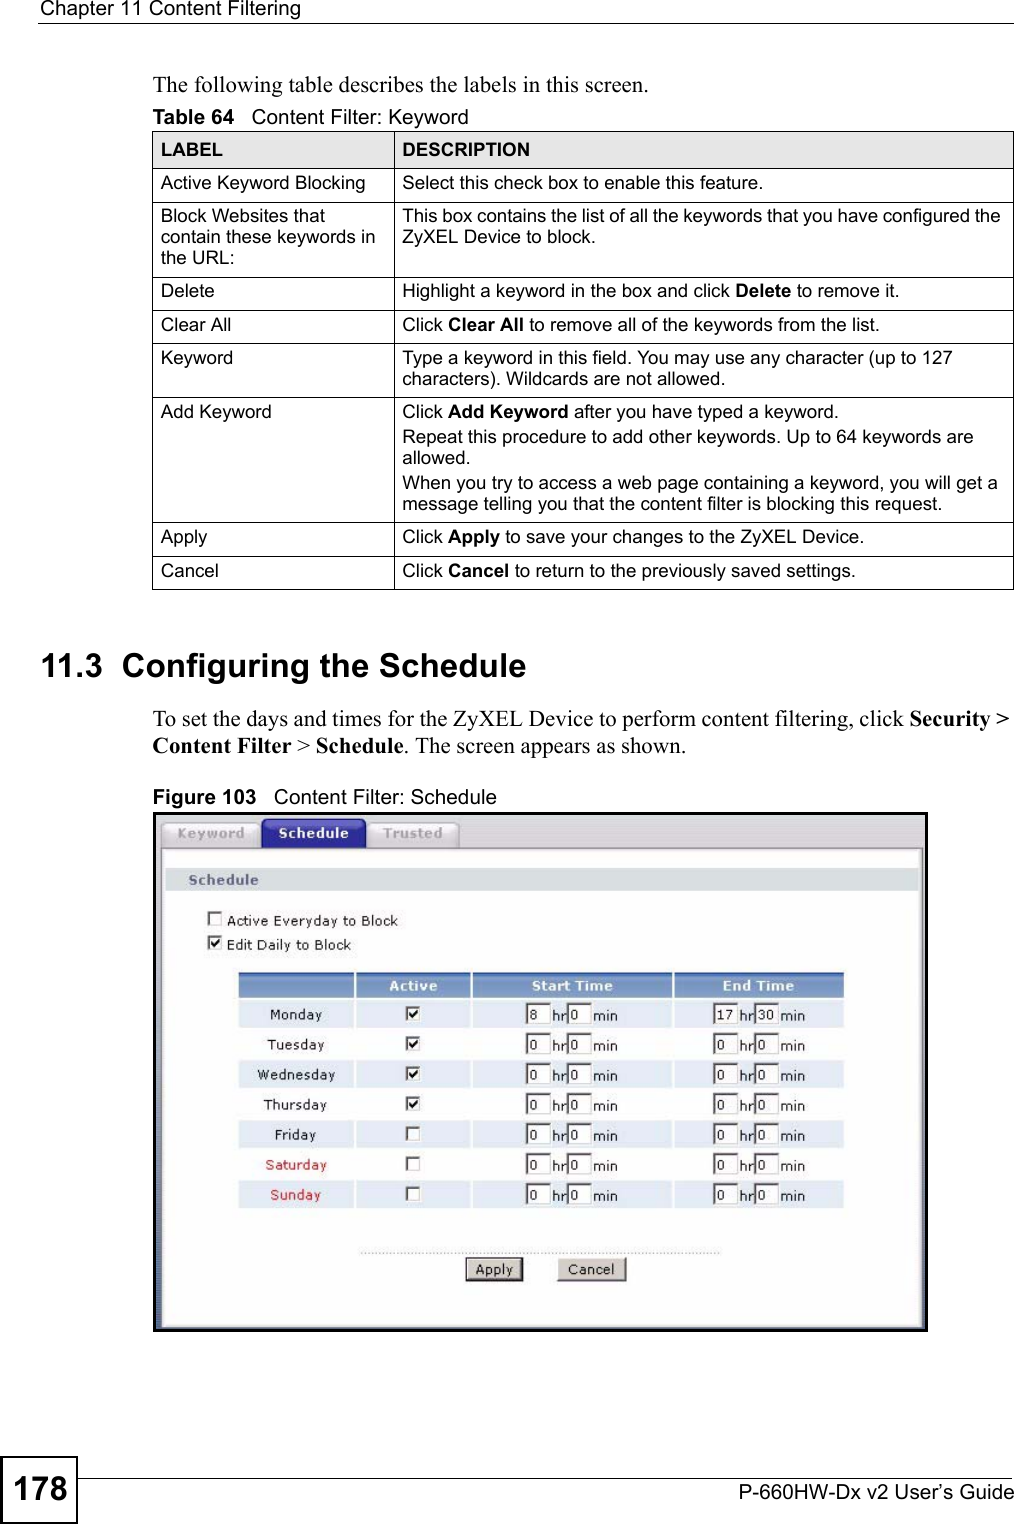 Chapter 11 Content FilteringP-660HW-Dx v2 User’s Guide178The following table describes the labels in this screen. 11.3  Configuring the Schedule To set the days and times for the ZyXEL Device to perform content filtering, click Security &gt; Content Filter &gt; Schedule. The screen appears as shown.Figure 103   Content Filter: ScheduleTable 64   Content Filter: KeywordLABEL DESCRIPTIONActive Keyword Blocking Select this check box to enable this feature.Block Websites that contain these keywords in the URL:This box contains the list of all the keywords that you have configured the ZyXEL Device to block. Delete  Highlight a keyword in the box and click Delete to remove it. Clear All  Click Clear All to remove all of the keywords from the list.Keyword Type a keyword in this field. You may use any character (up to 127 characters). Wildcards are not allowed.Add Keyword Click Add Keyword after you have typed a keyword. Repeat this procedure to add other keywords. Up to 64 keywords are allowed.When you try to access a web page containing a keyword, you will get a message telling you that the content filter is blocking this request.Apply Click Apply to save your changes to the ZyXEL Device.Cancel Click Cancel to return to the previously saved settings.